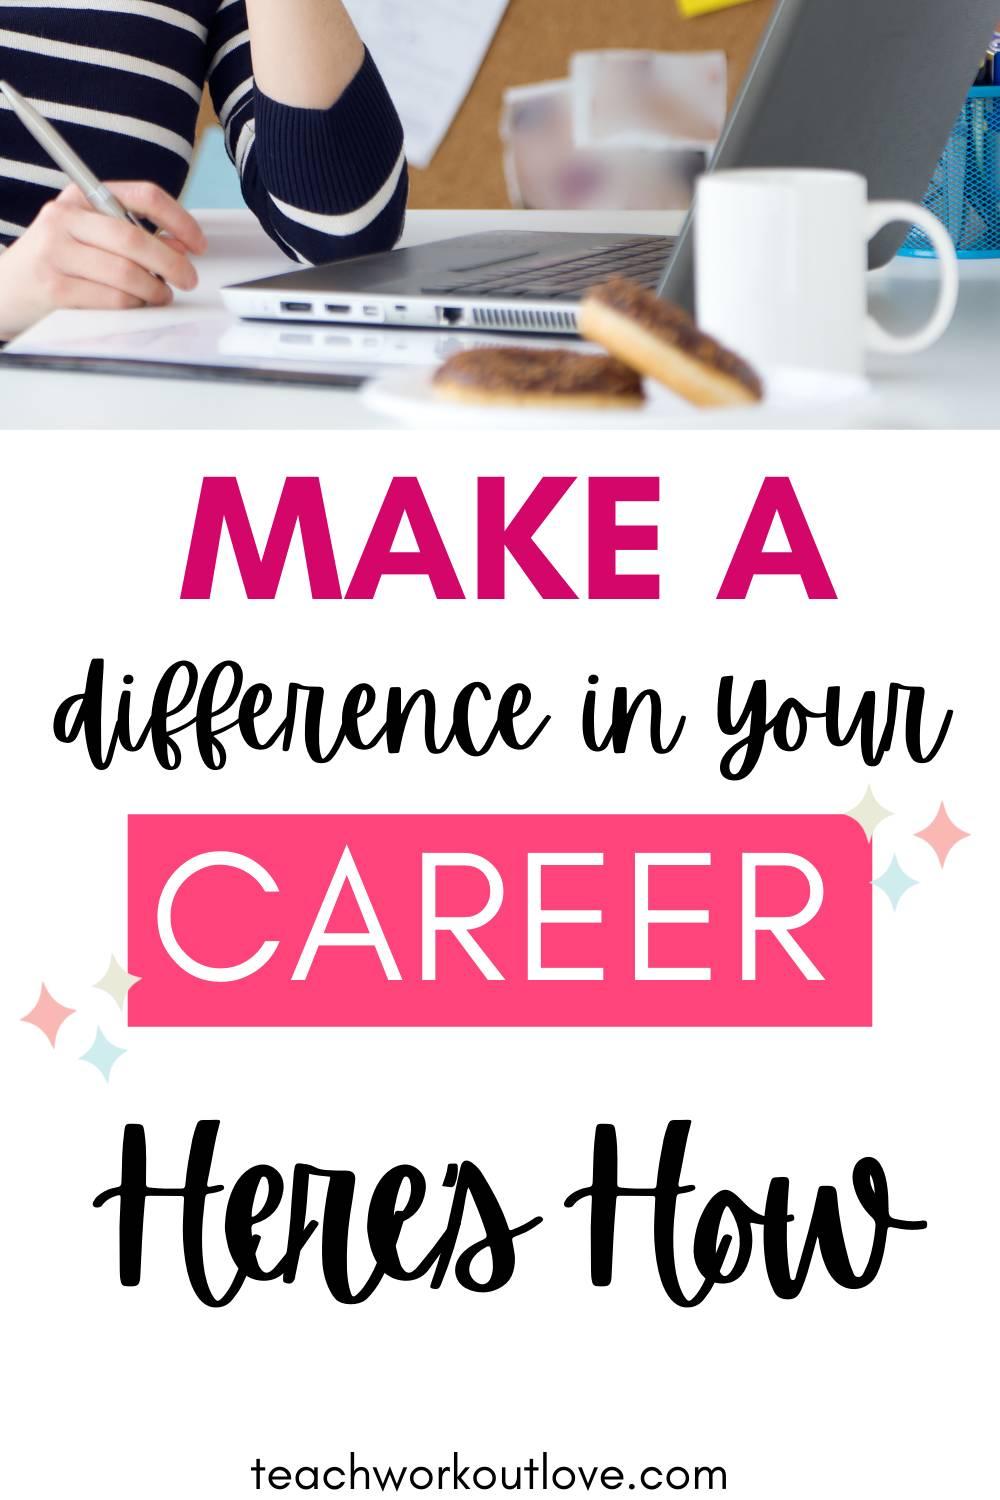 Everybody feels that they need to make a difference in their lives. But what are the things that you need to consider when looking for a career that makes all the difference? Here's how.